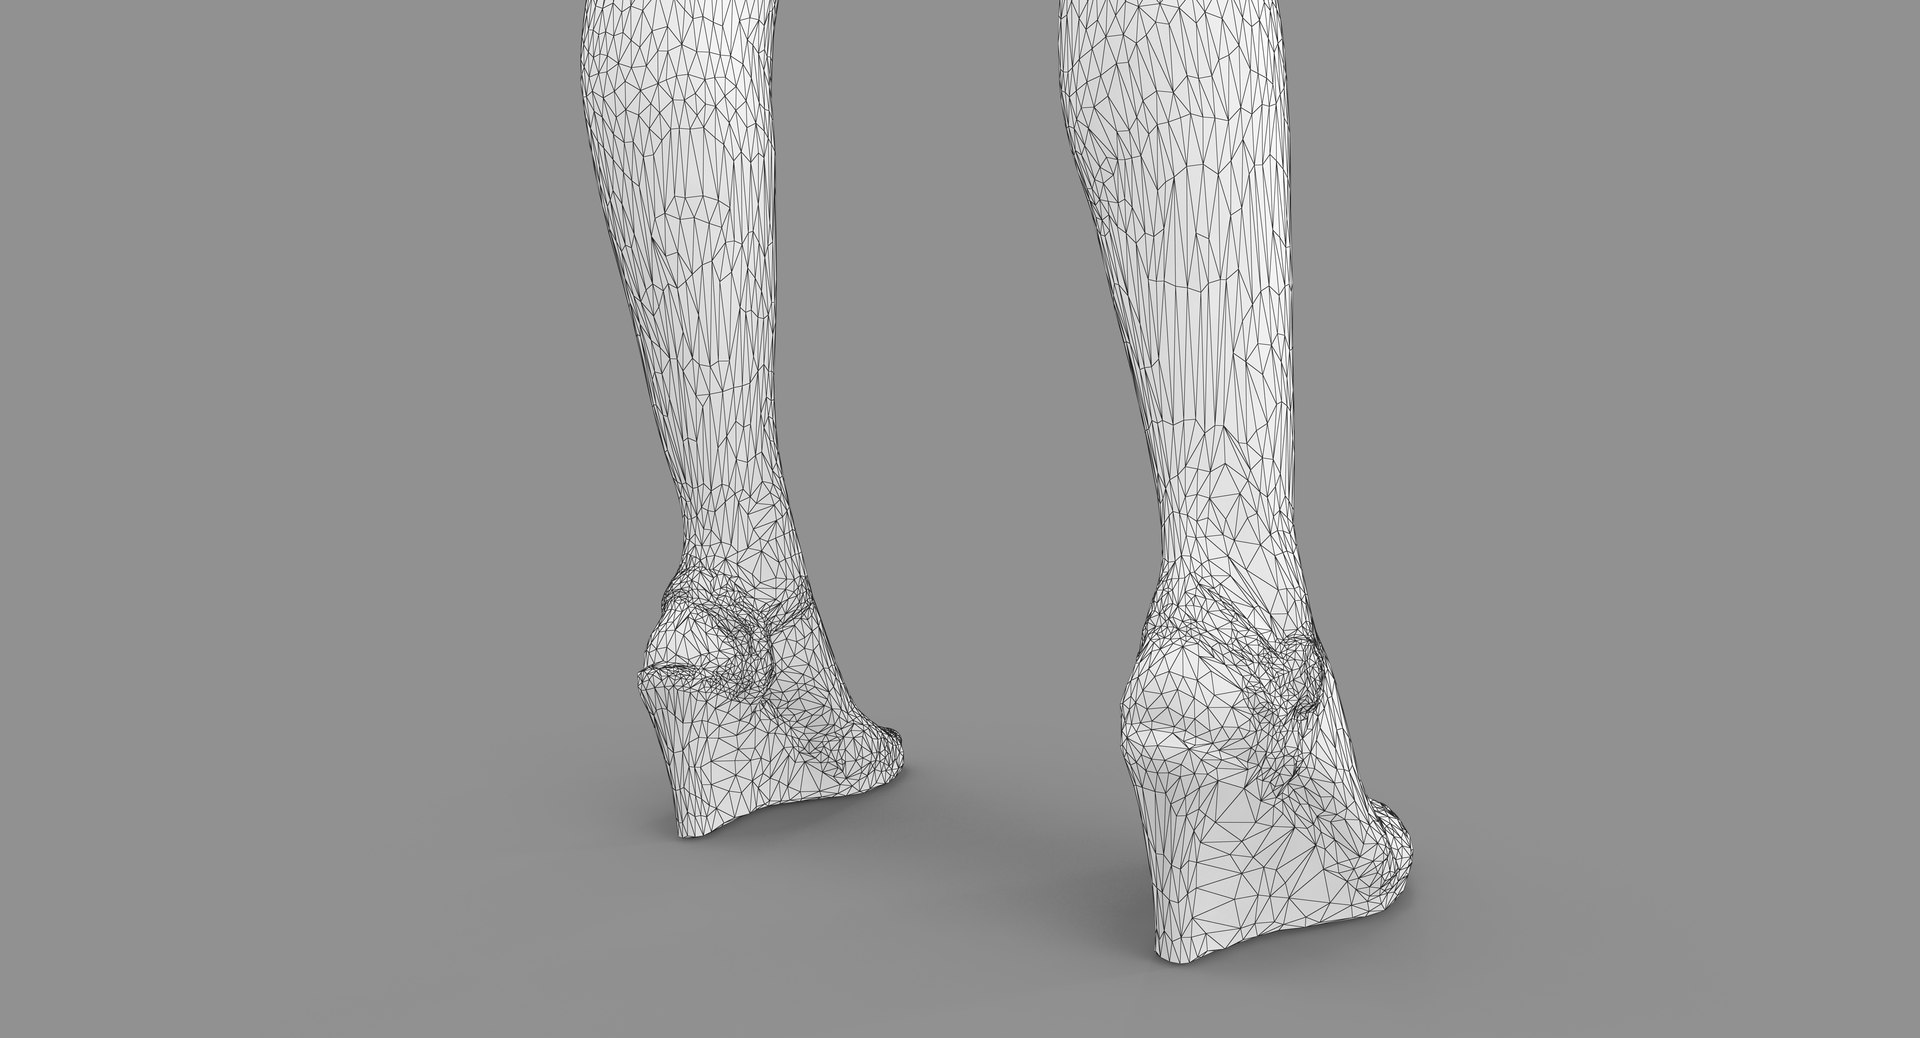 3ds max human body